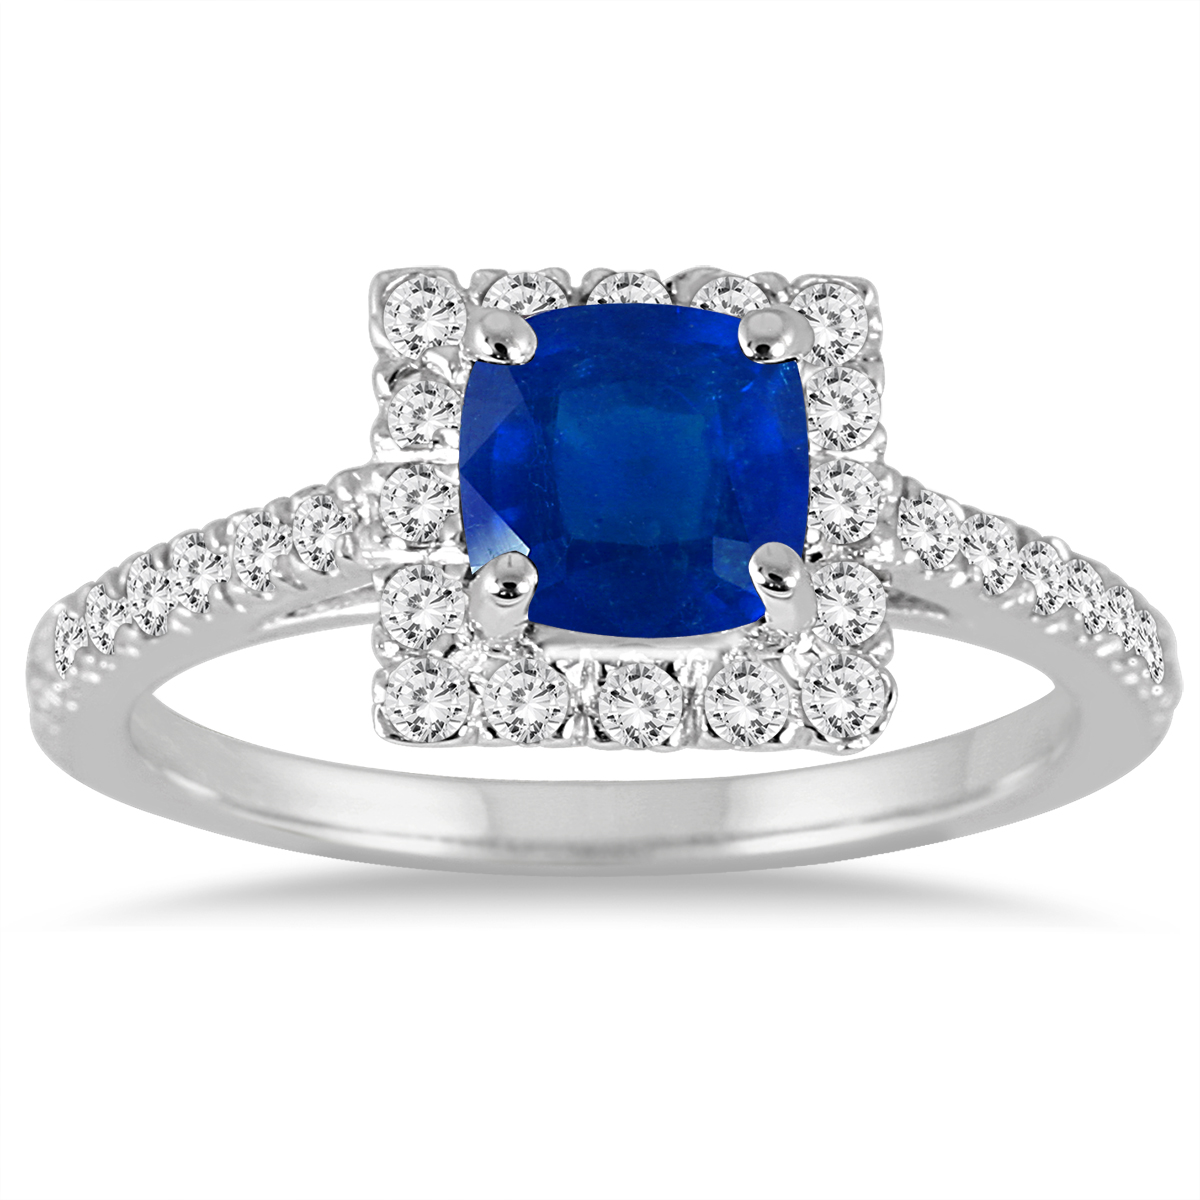 Cushion Cut Sapphire and Diamond Halo Ring in 14K White Gold